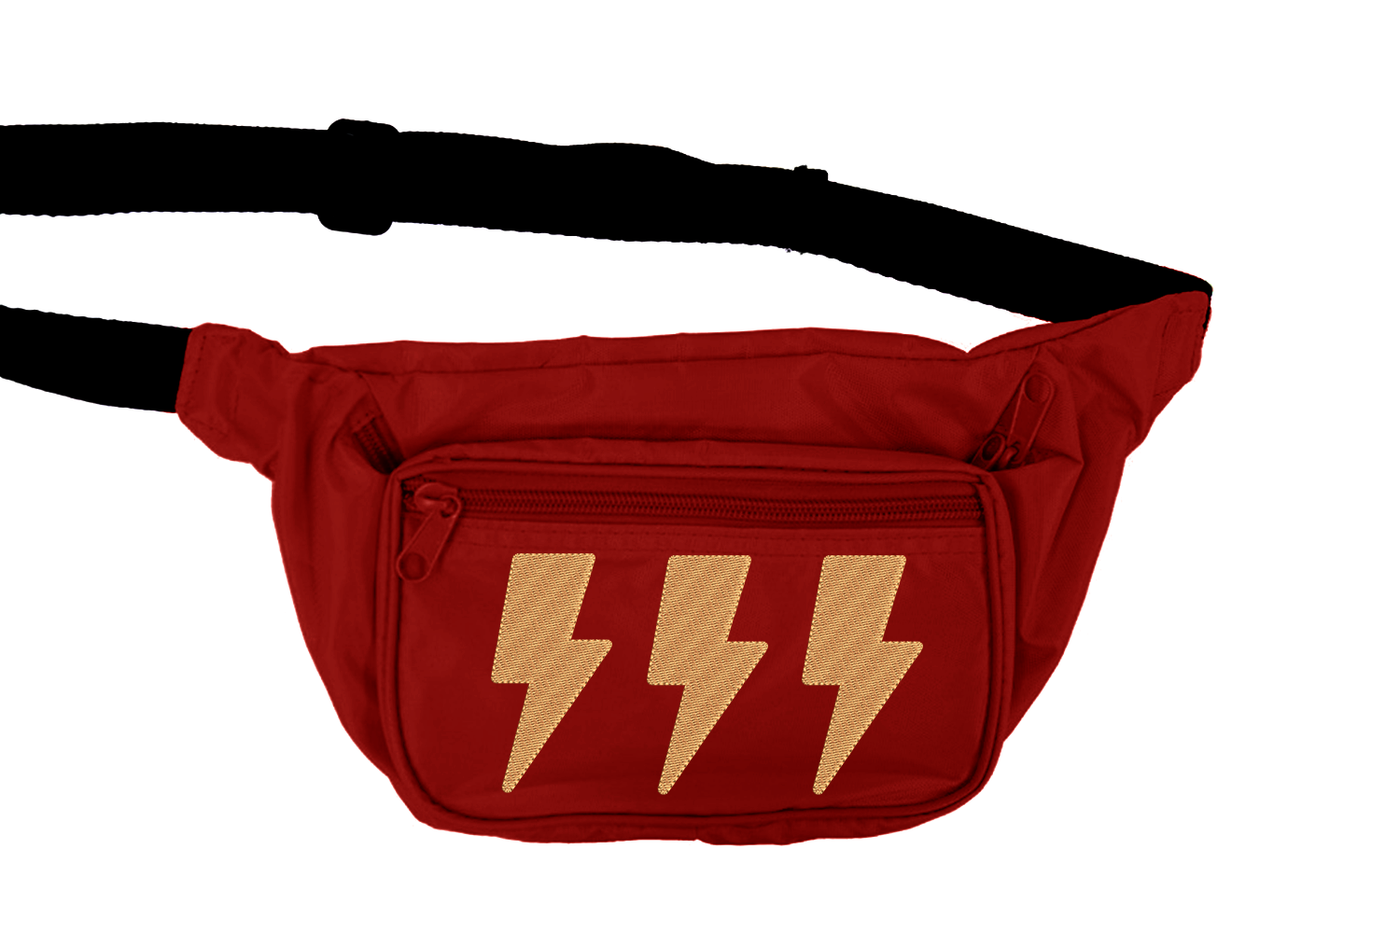 Dark red fanny pack with 3 embroidered lightning bolts.